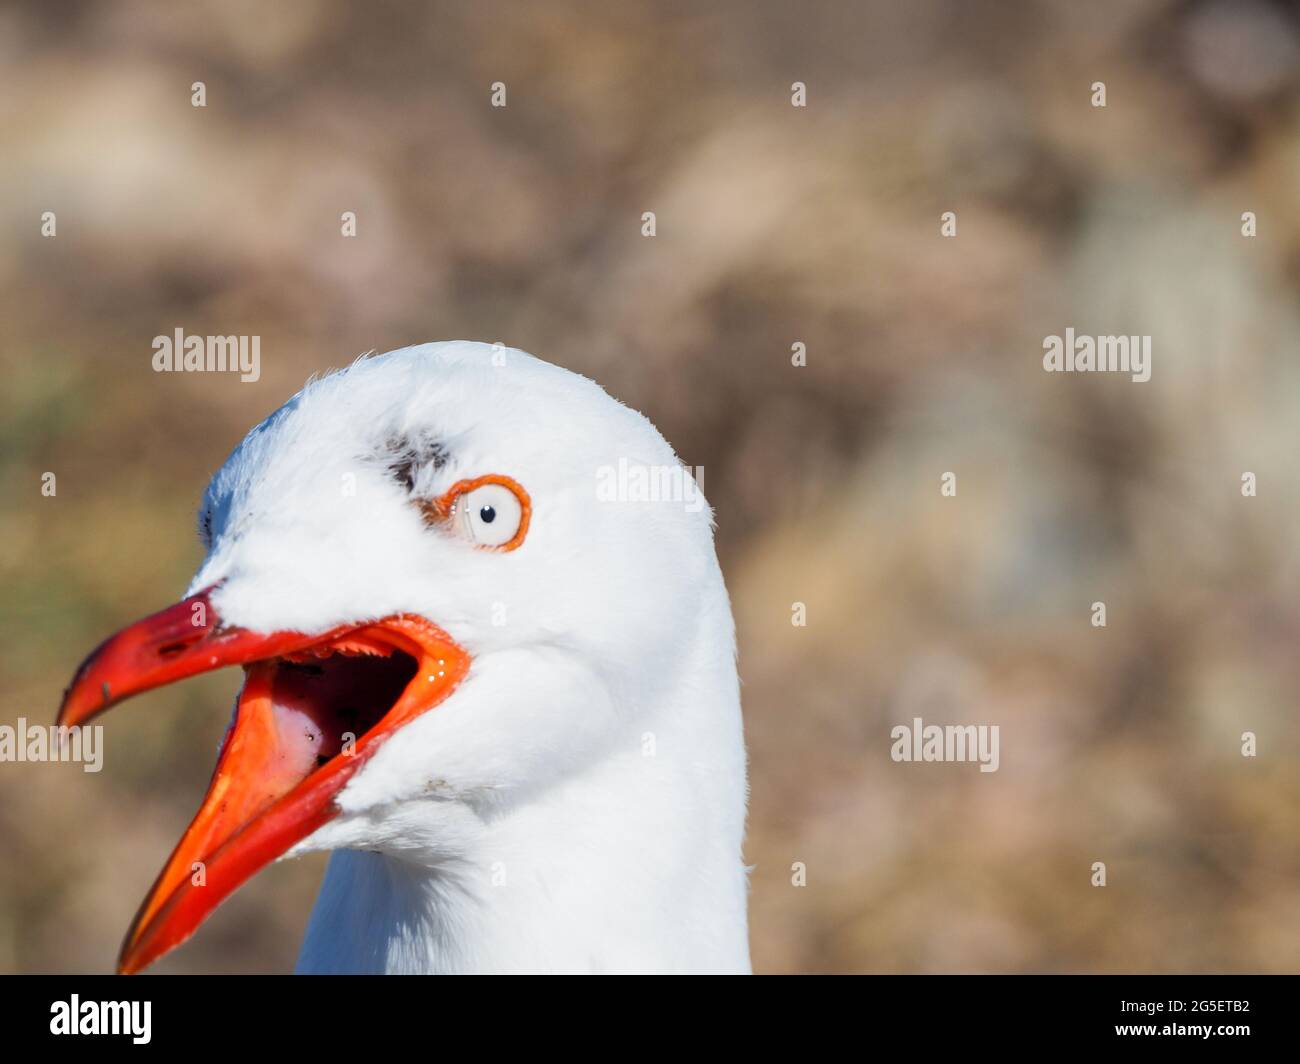 Funny Bird, angry Australian Seagull, Silver Gull, orange beak wide open, a shocked expression on it's face, making some noise, screeching. Stock Photo